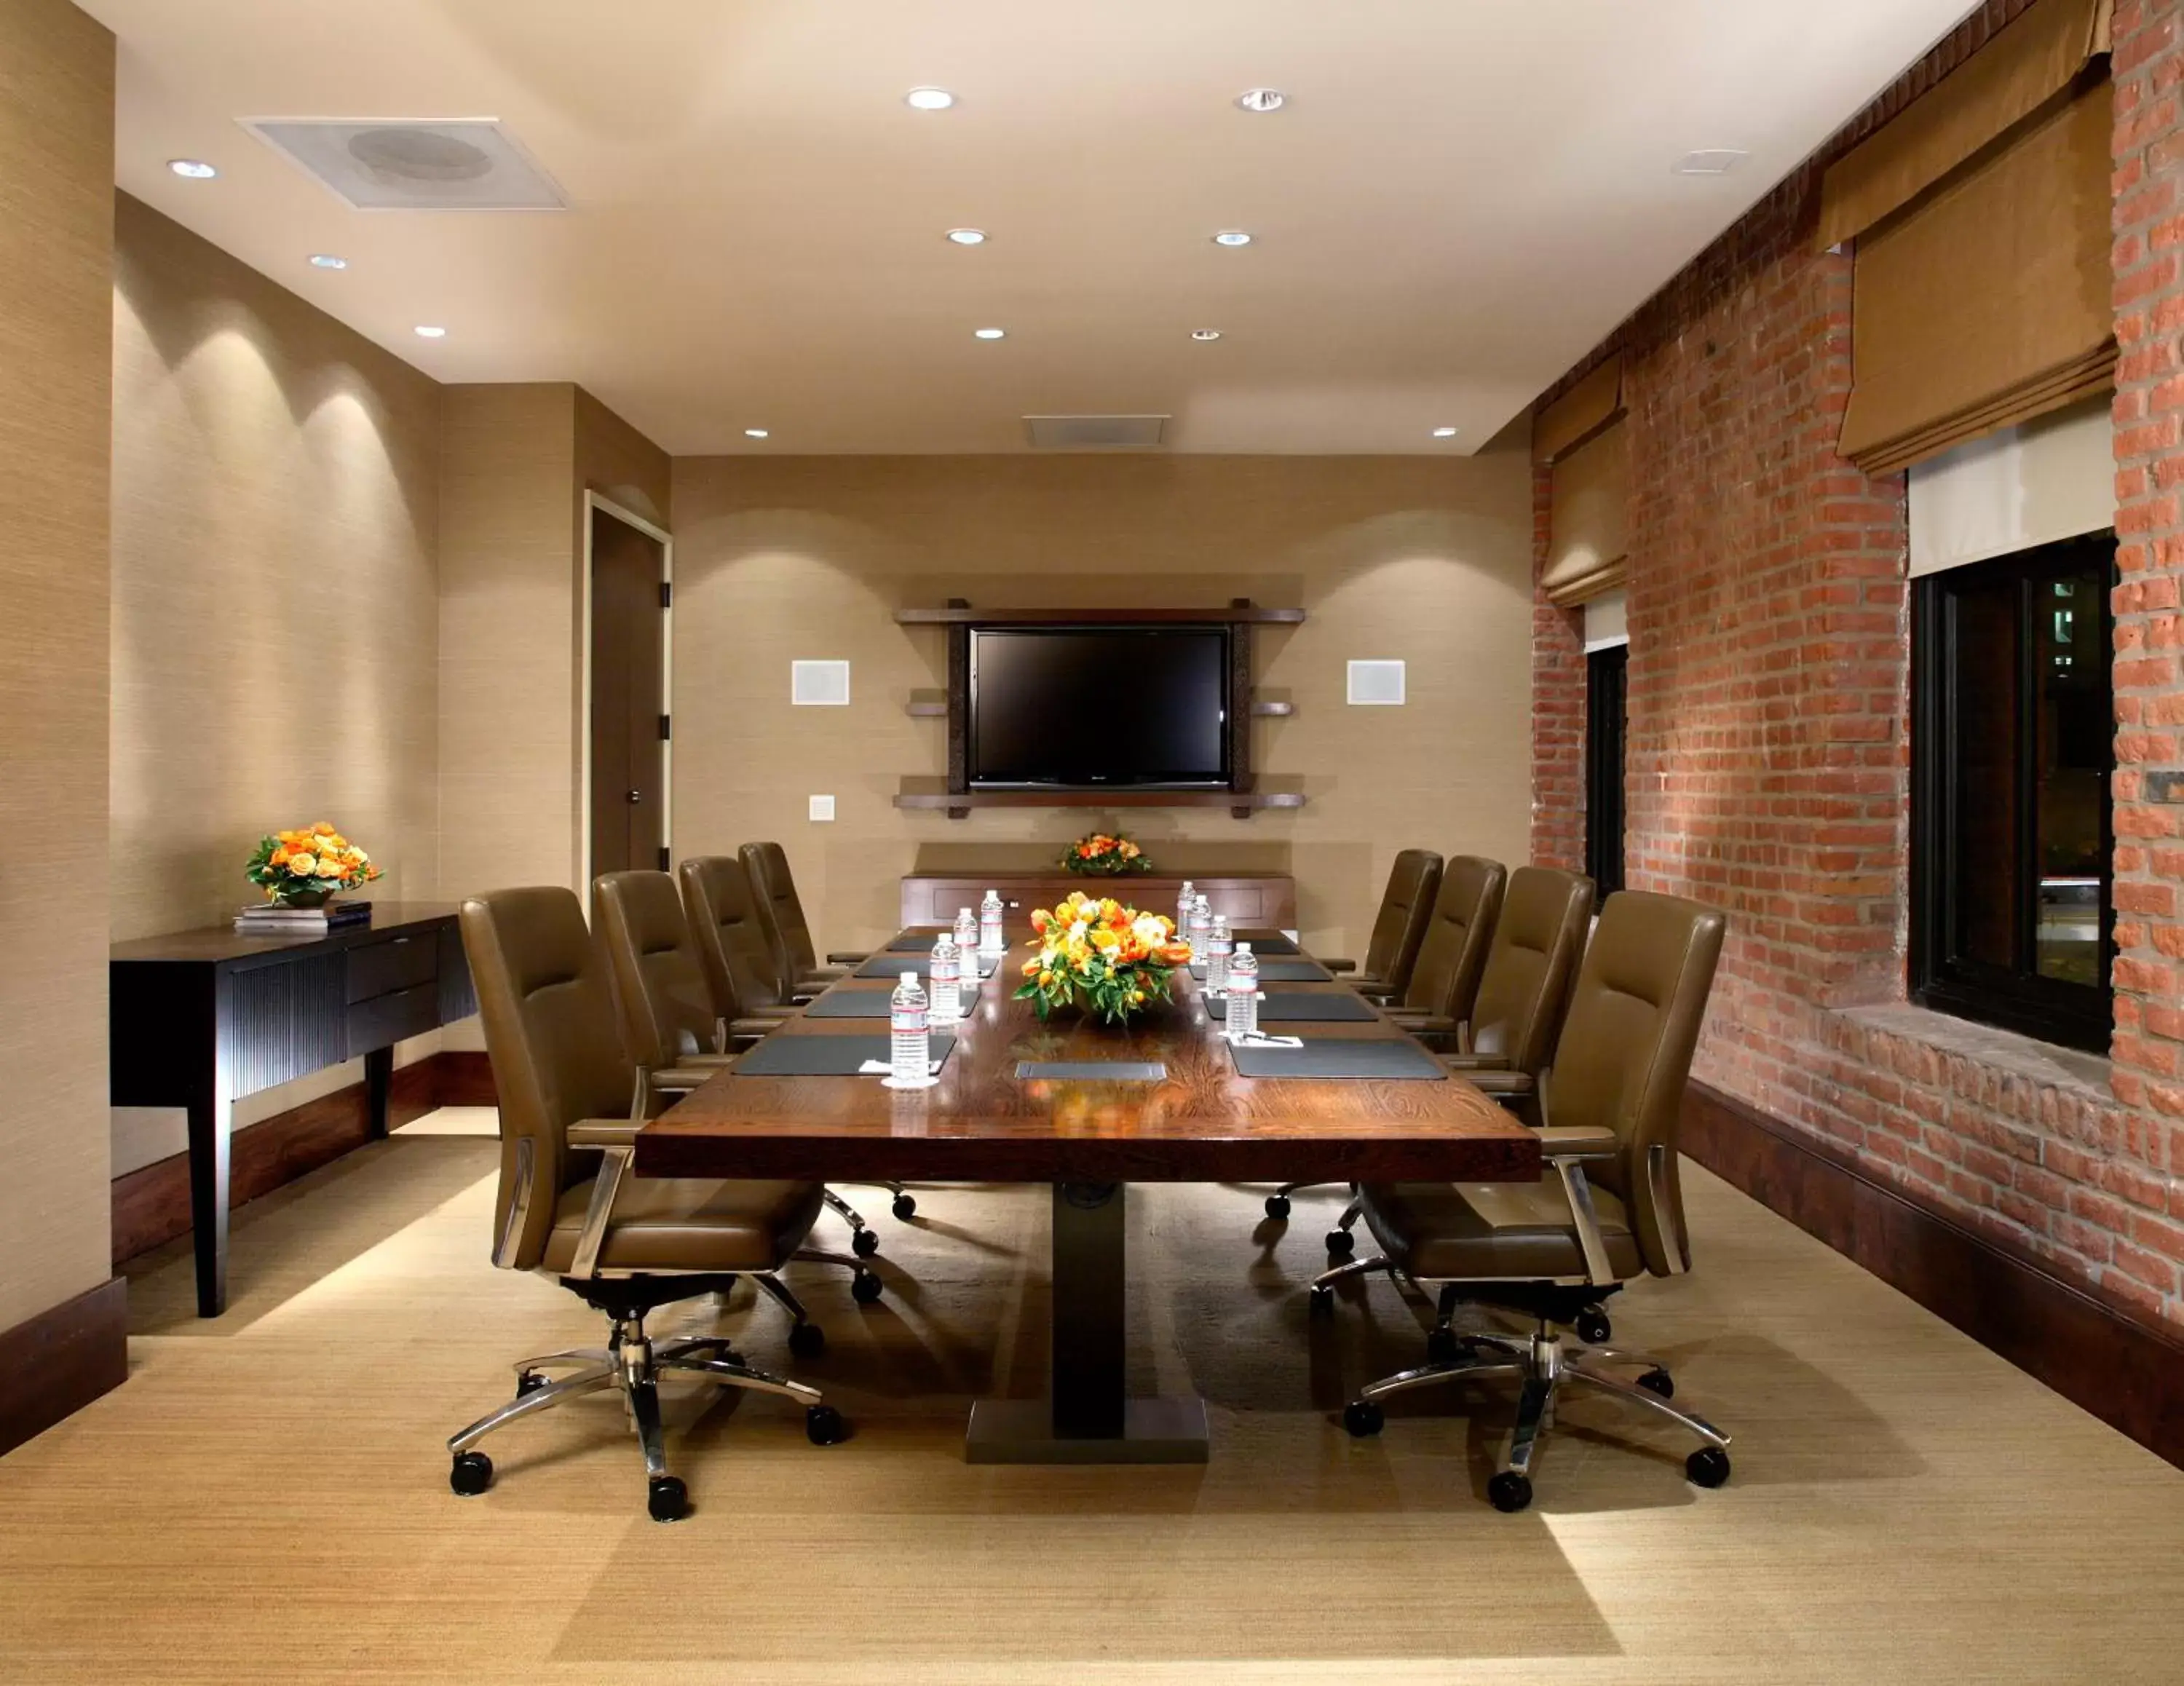 Business facilities in The Fairmont Heritage Place Ghirardelli Square